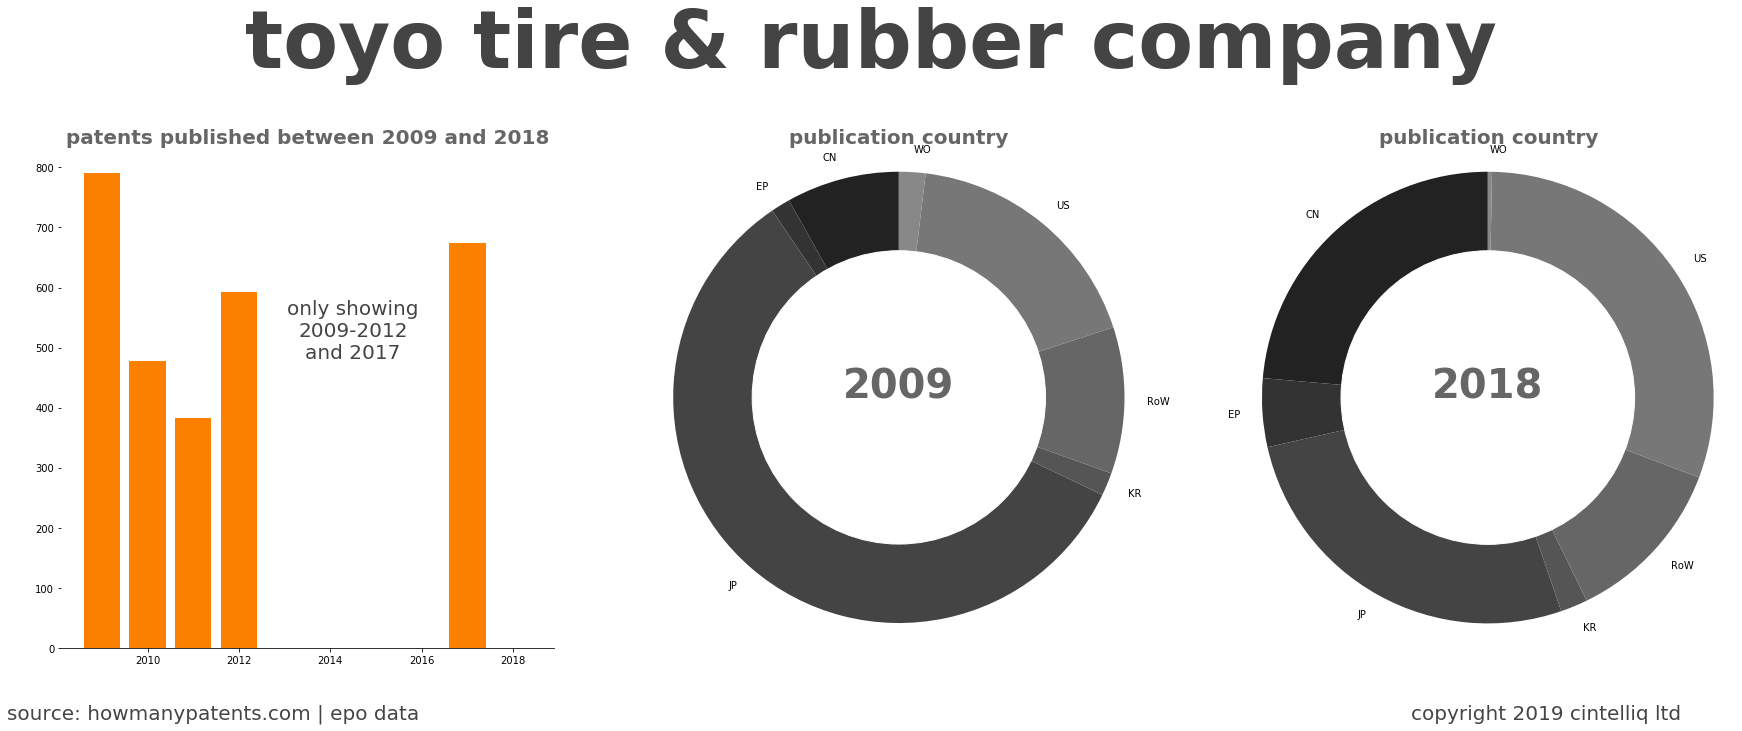 summary of patents for Toyo Tire & Rubber Company